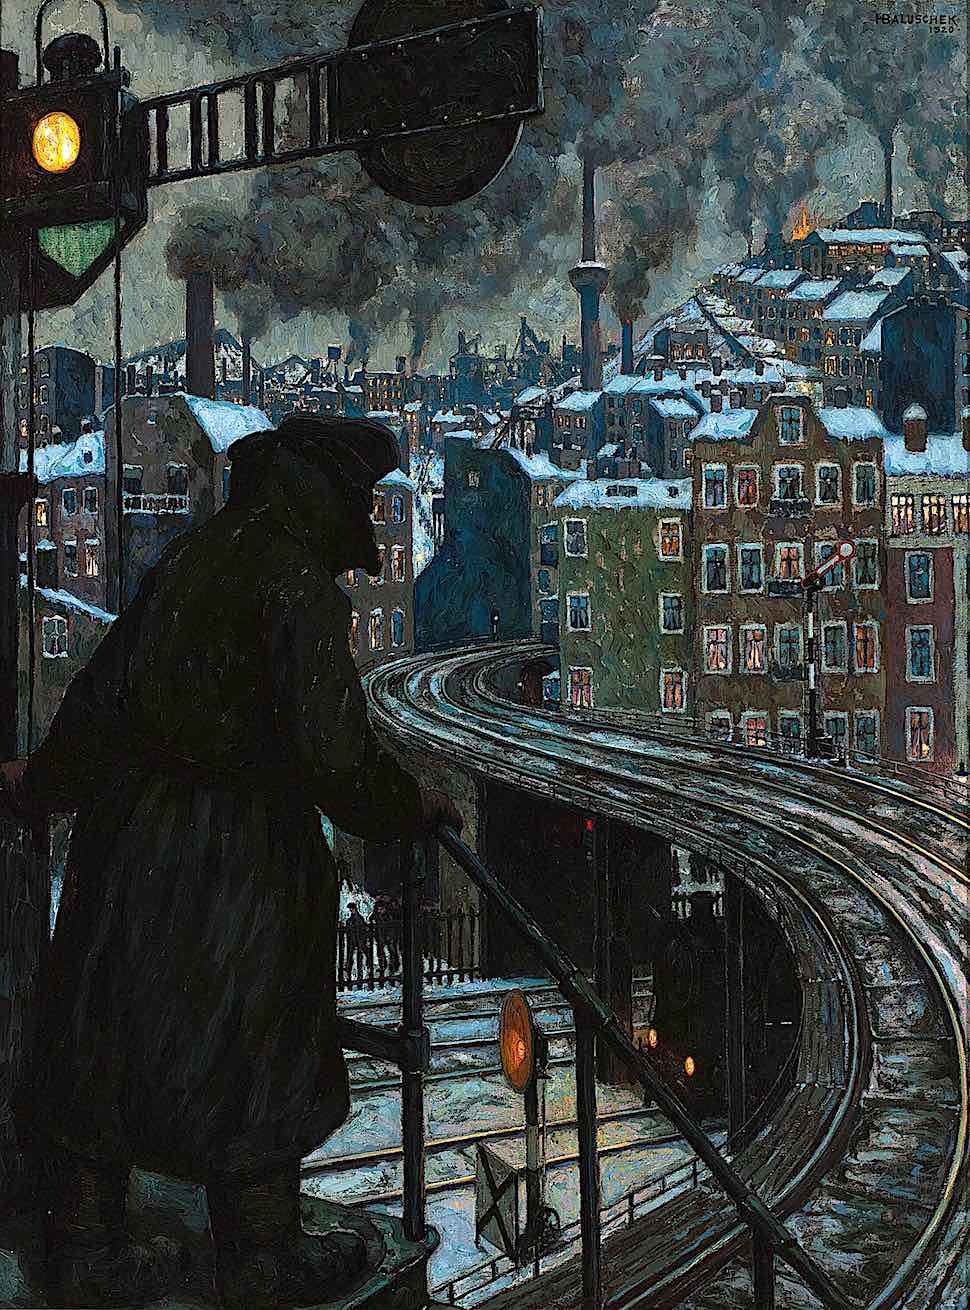 a Hans Baluschek 1920 painting of a rail worker at night